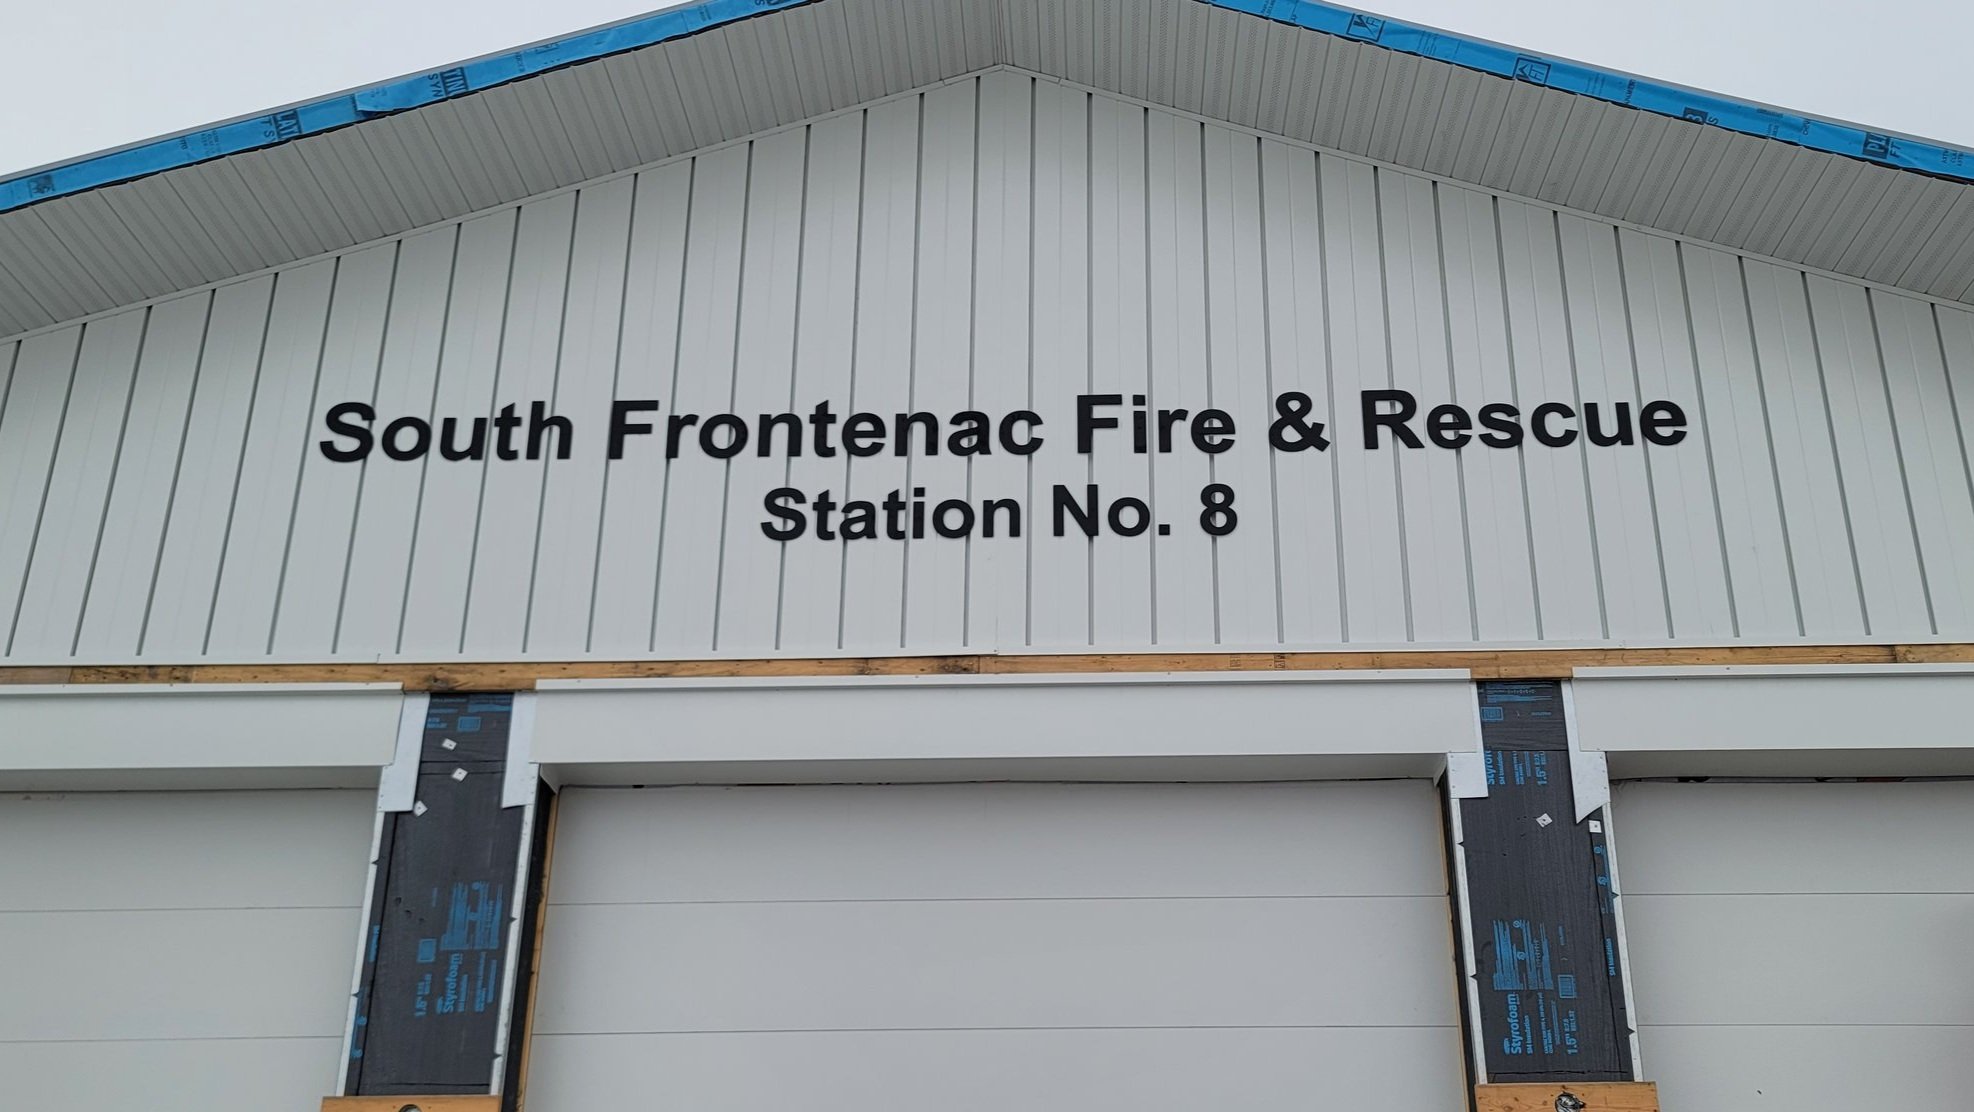 South+Frontenac+Fire+%26+Rescue+Station+No.+8+-++1.jpg